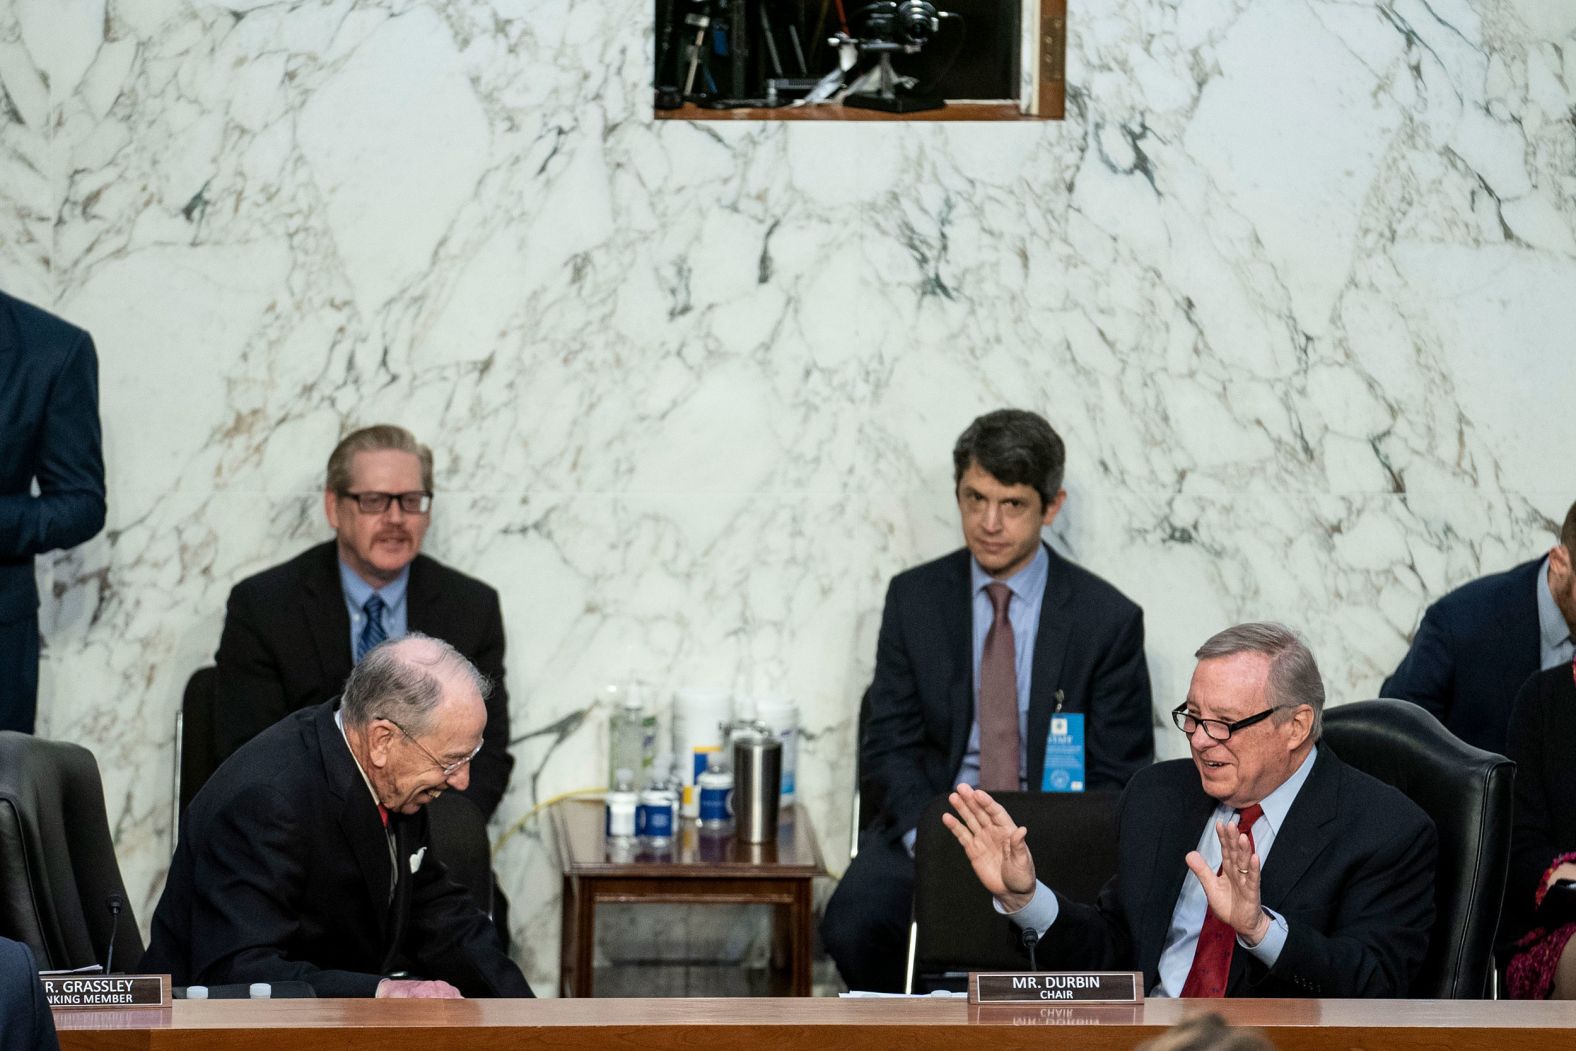 Durbin and Grassley laugh together before the start of proceedings on March 22.